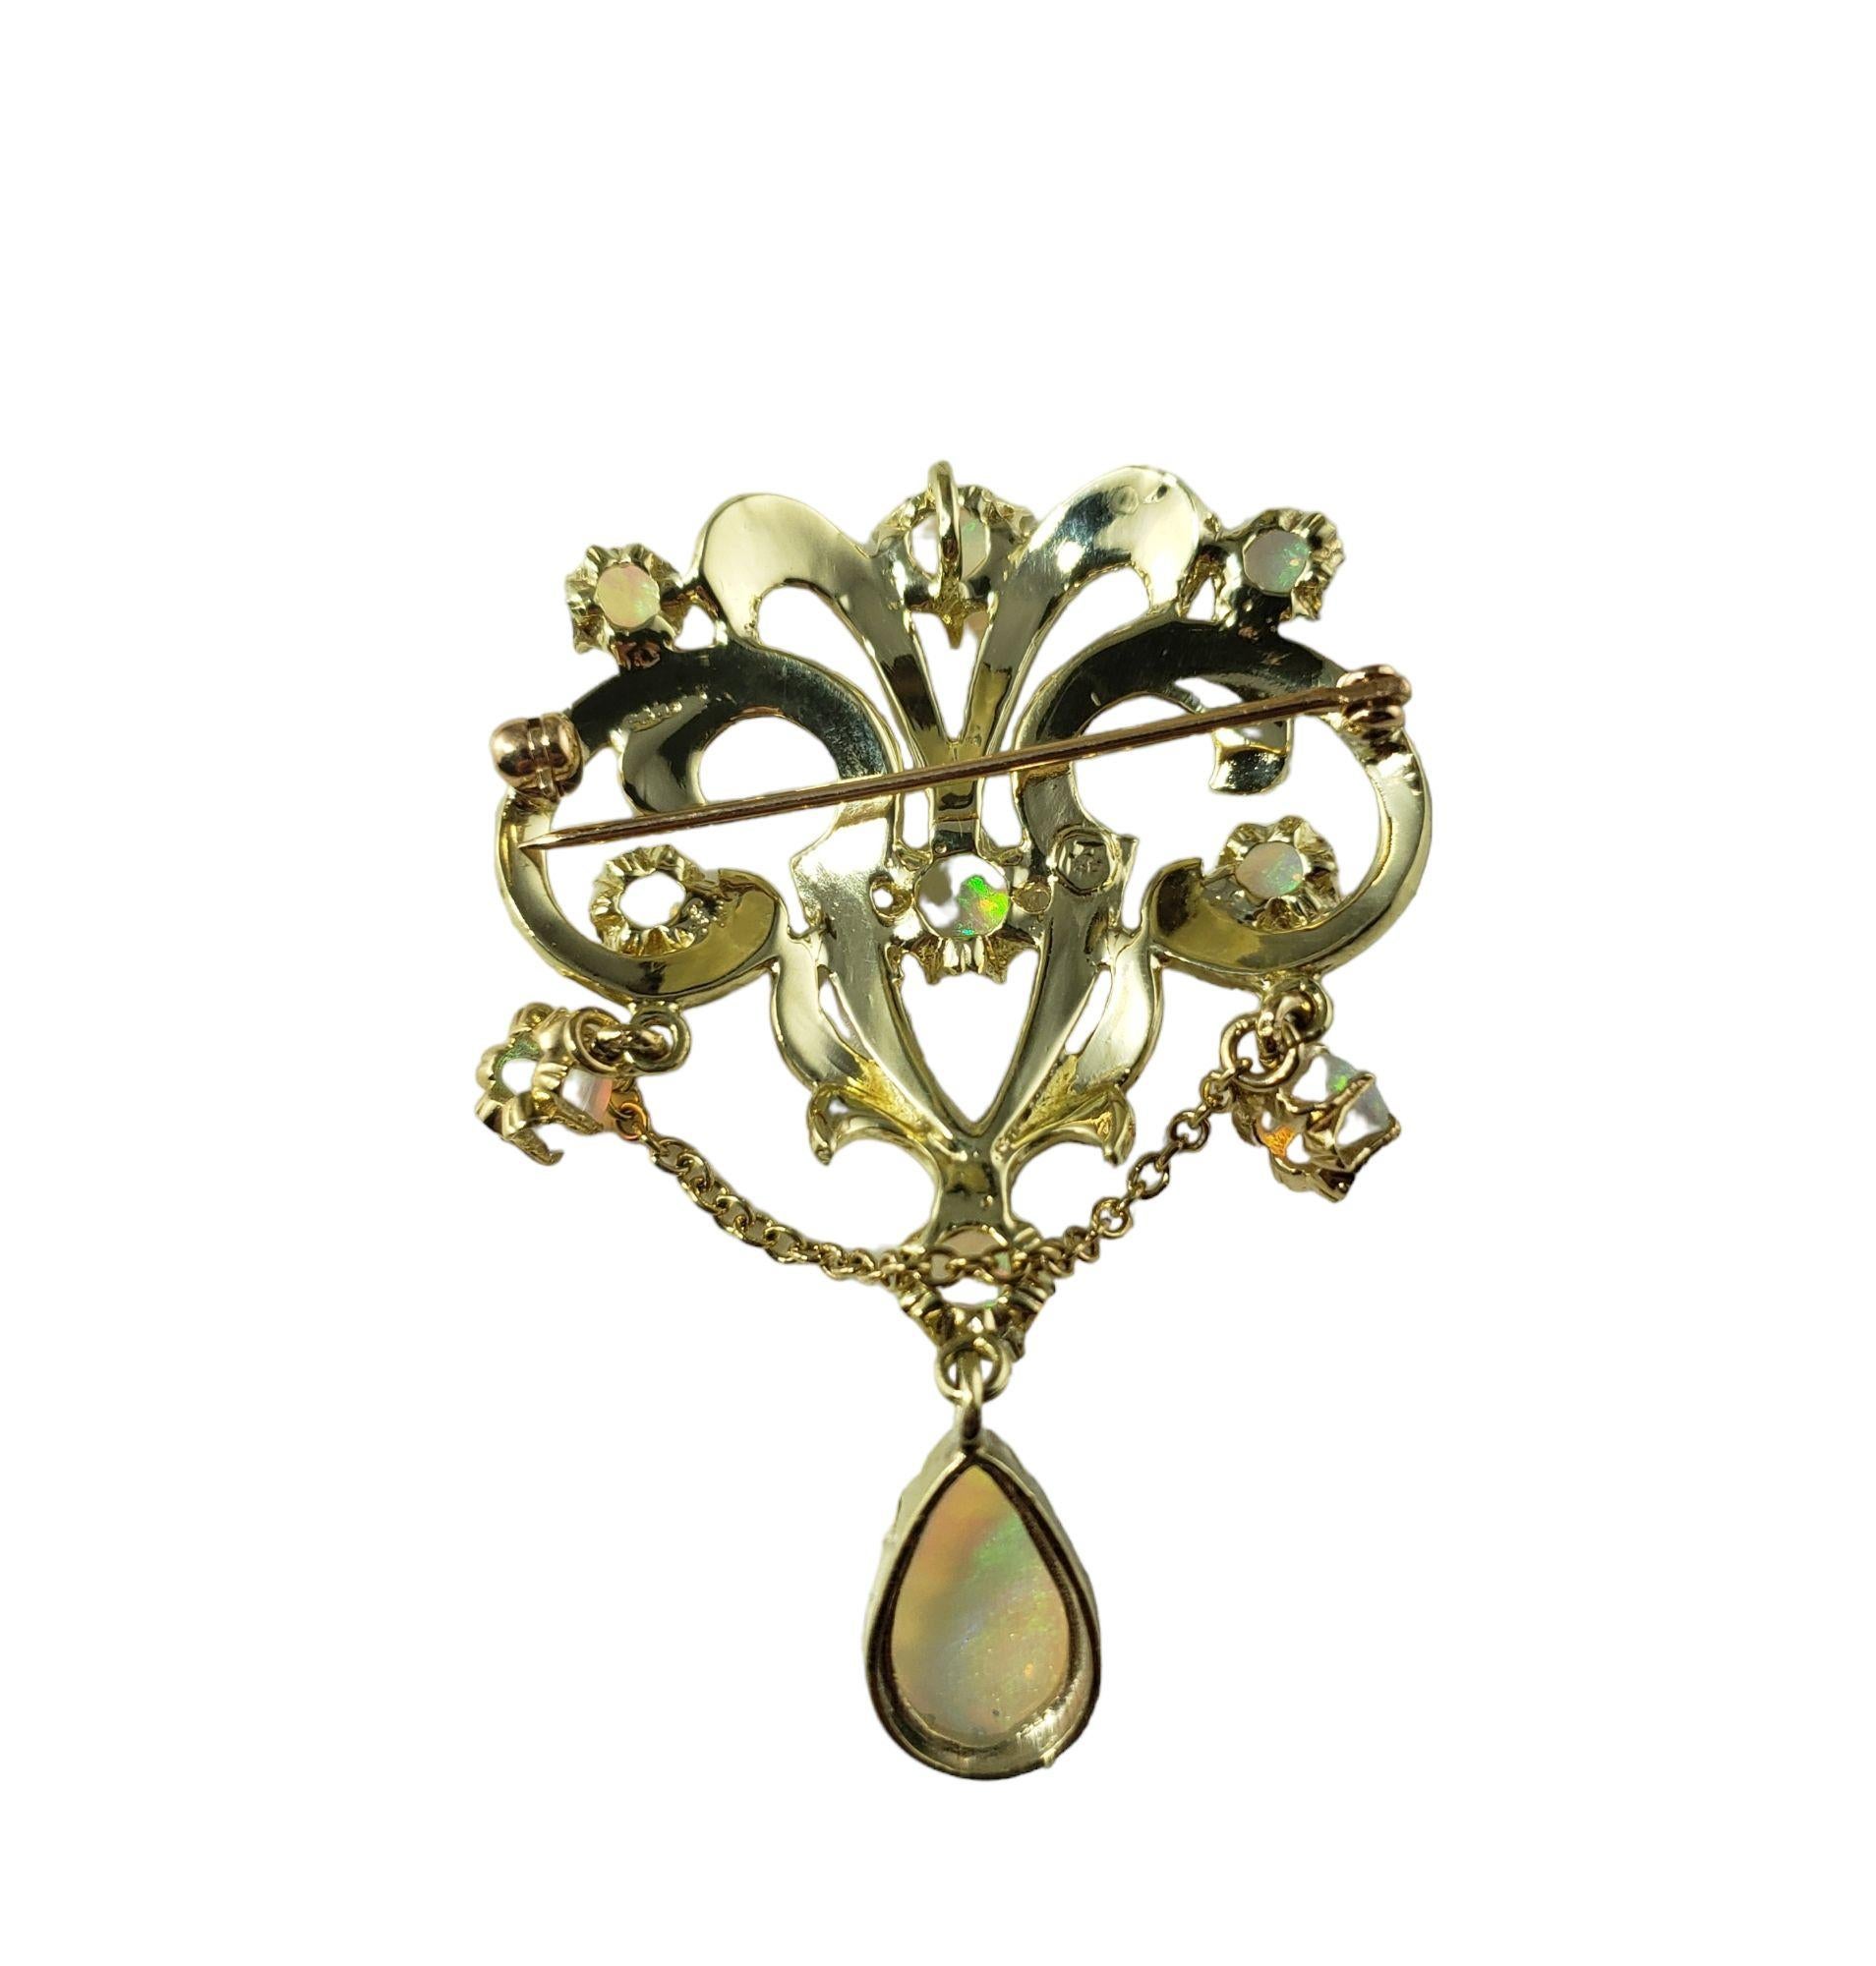 Vintage 14 Karat Yellow Gold and Opal Brooch/Pendant-

This lovely piece features 32 opals set in beautifully detailed 14K yellow gold. Can be worn as a brooch or a pendant.

Size: 52 mm x 31 mm

Weight: 11.5 gr./ 7.3 dwt.

Very good condition,